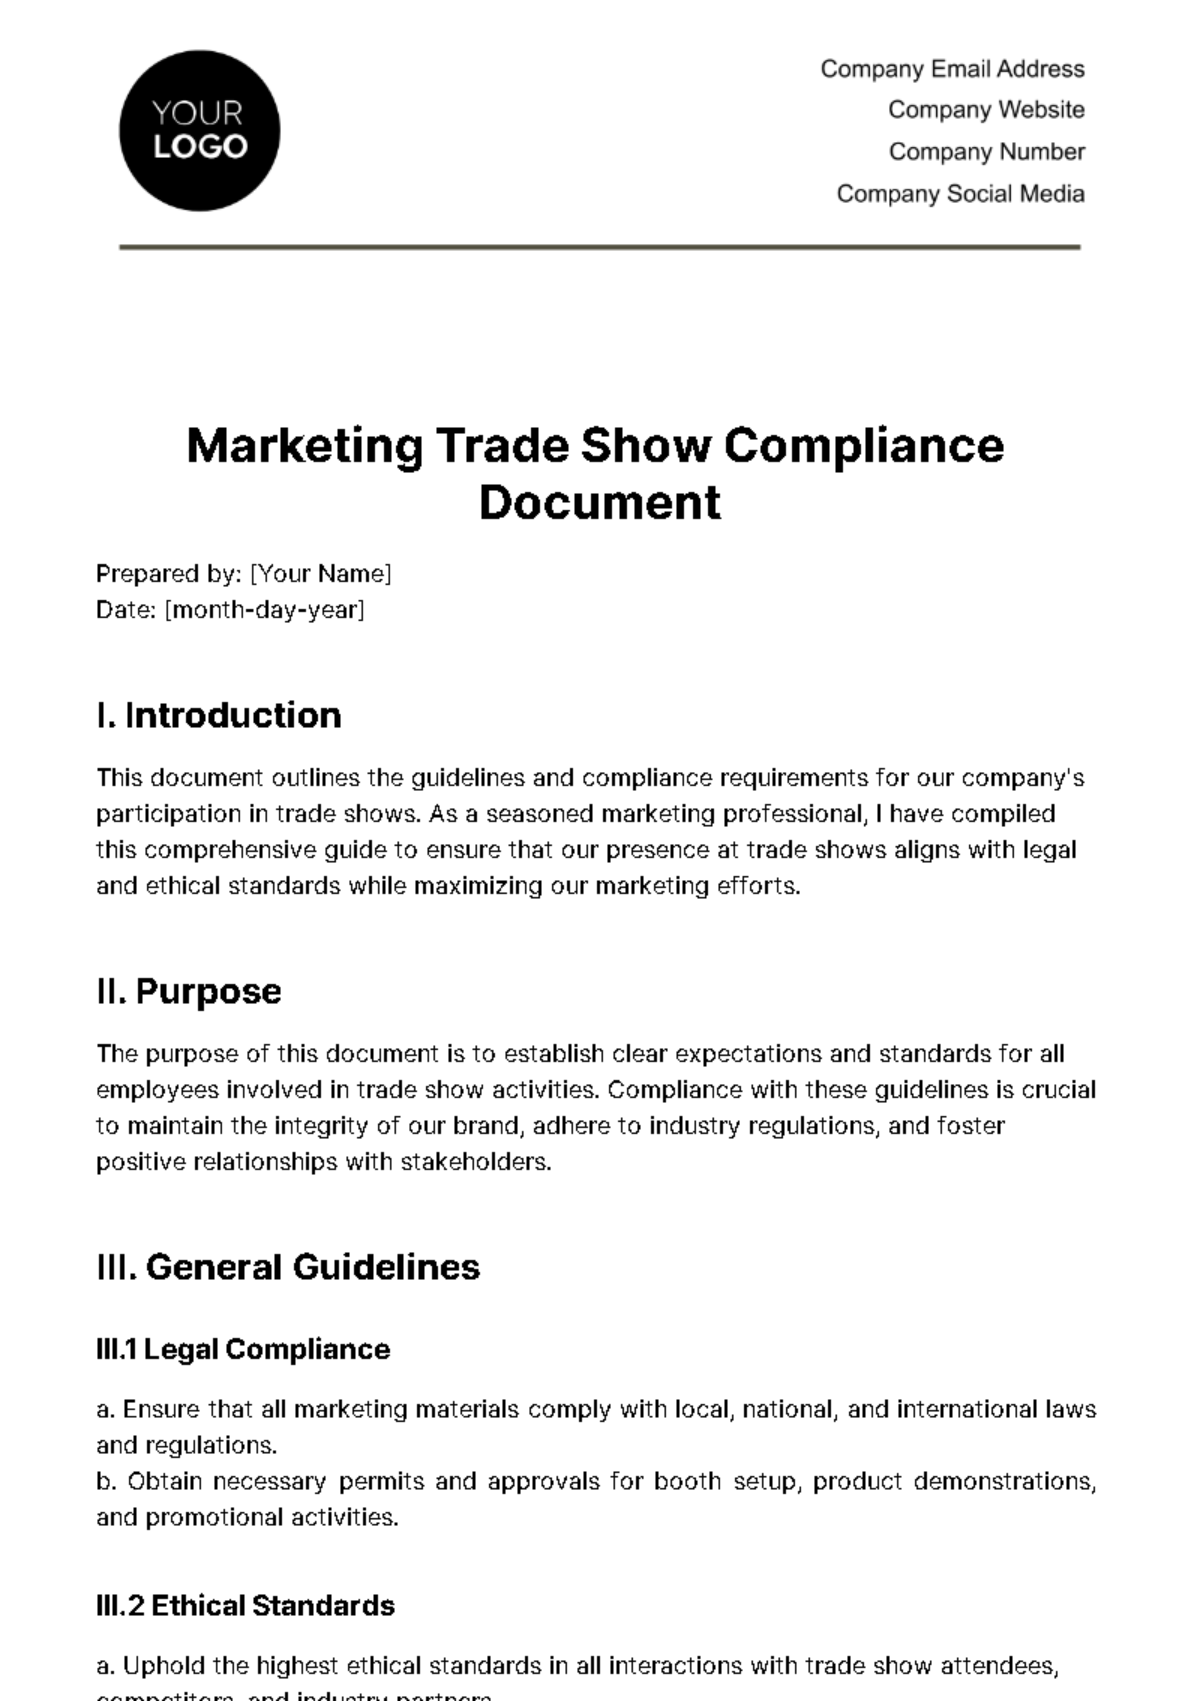 Marketing Trade Show Compliance Document Template